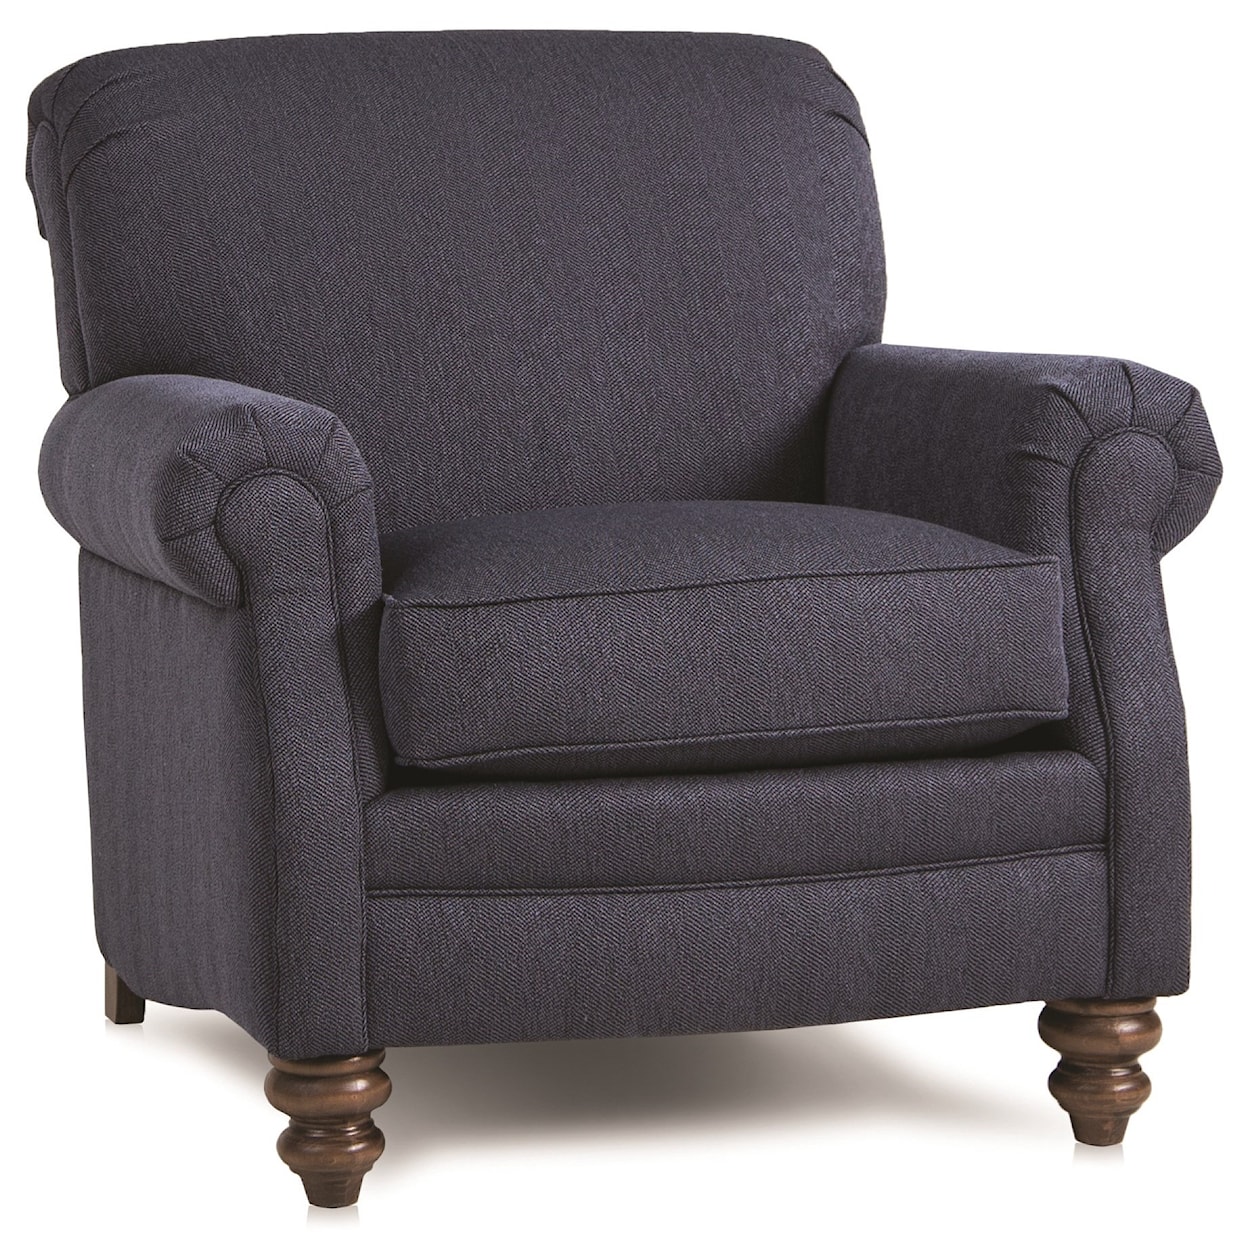 Smith Brothers 383 Customizable Upholstered Arm Chair